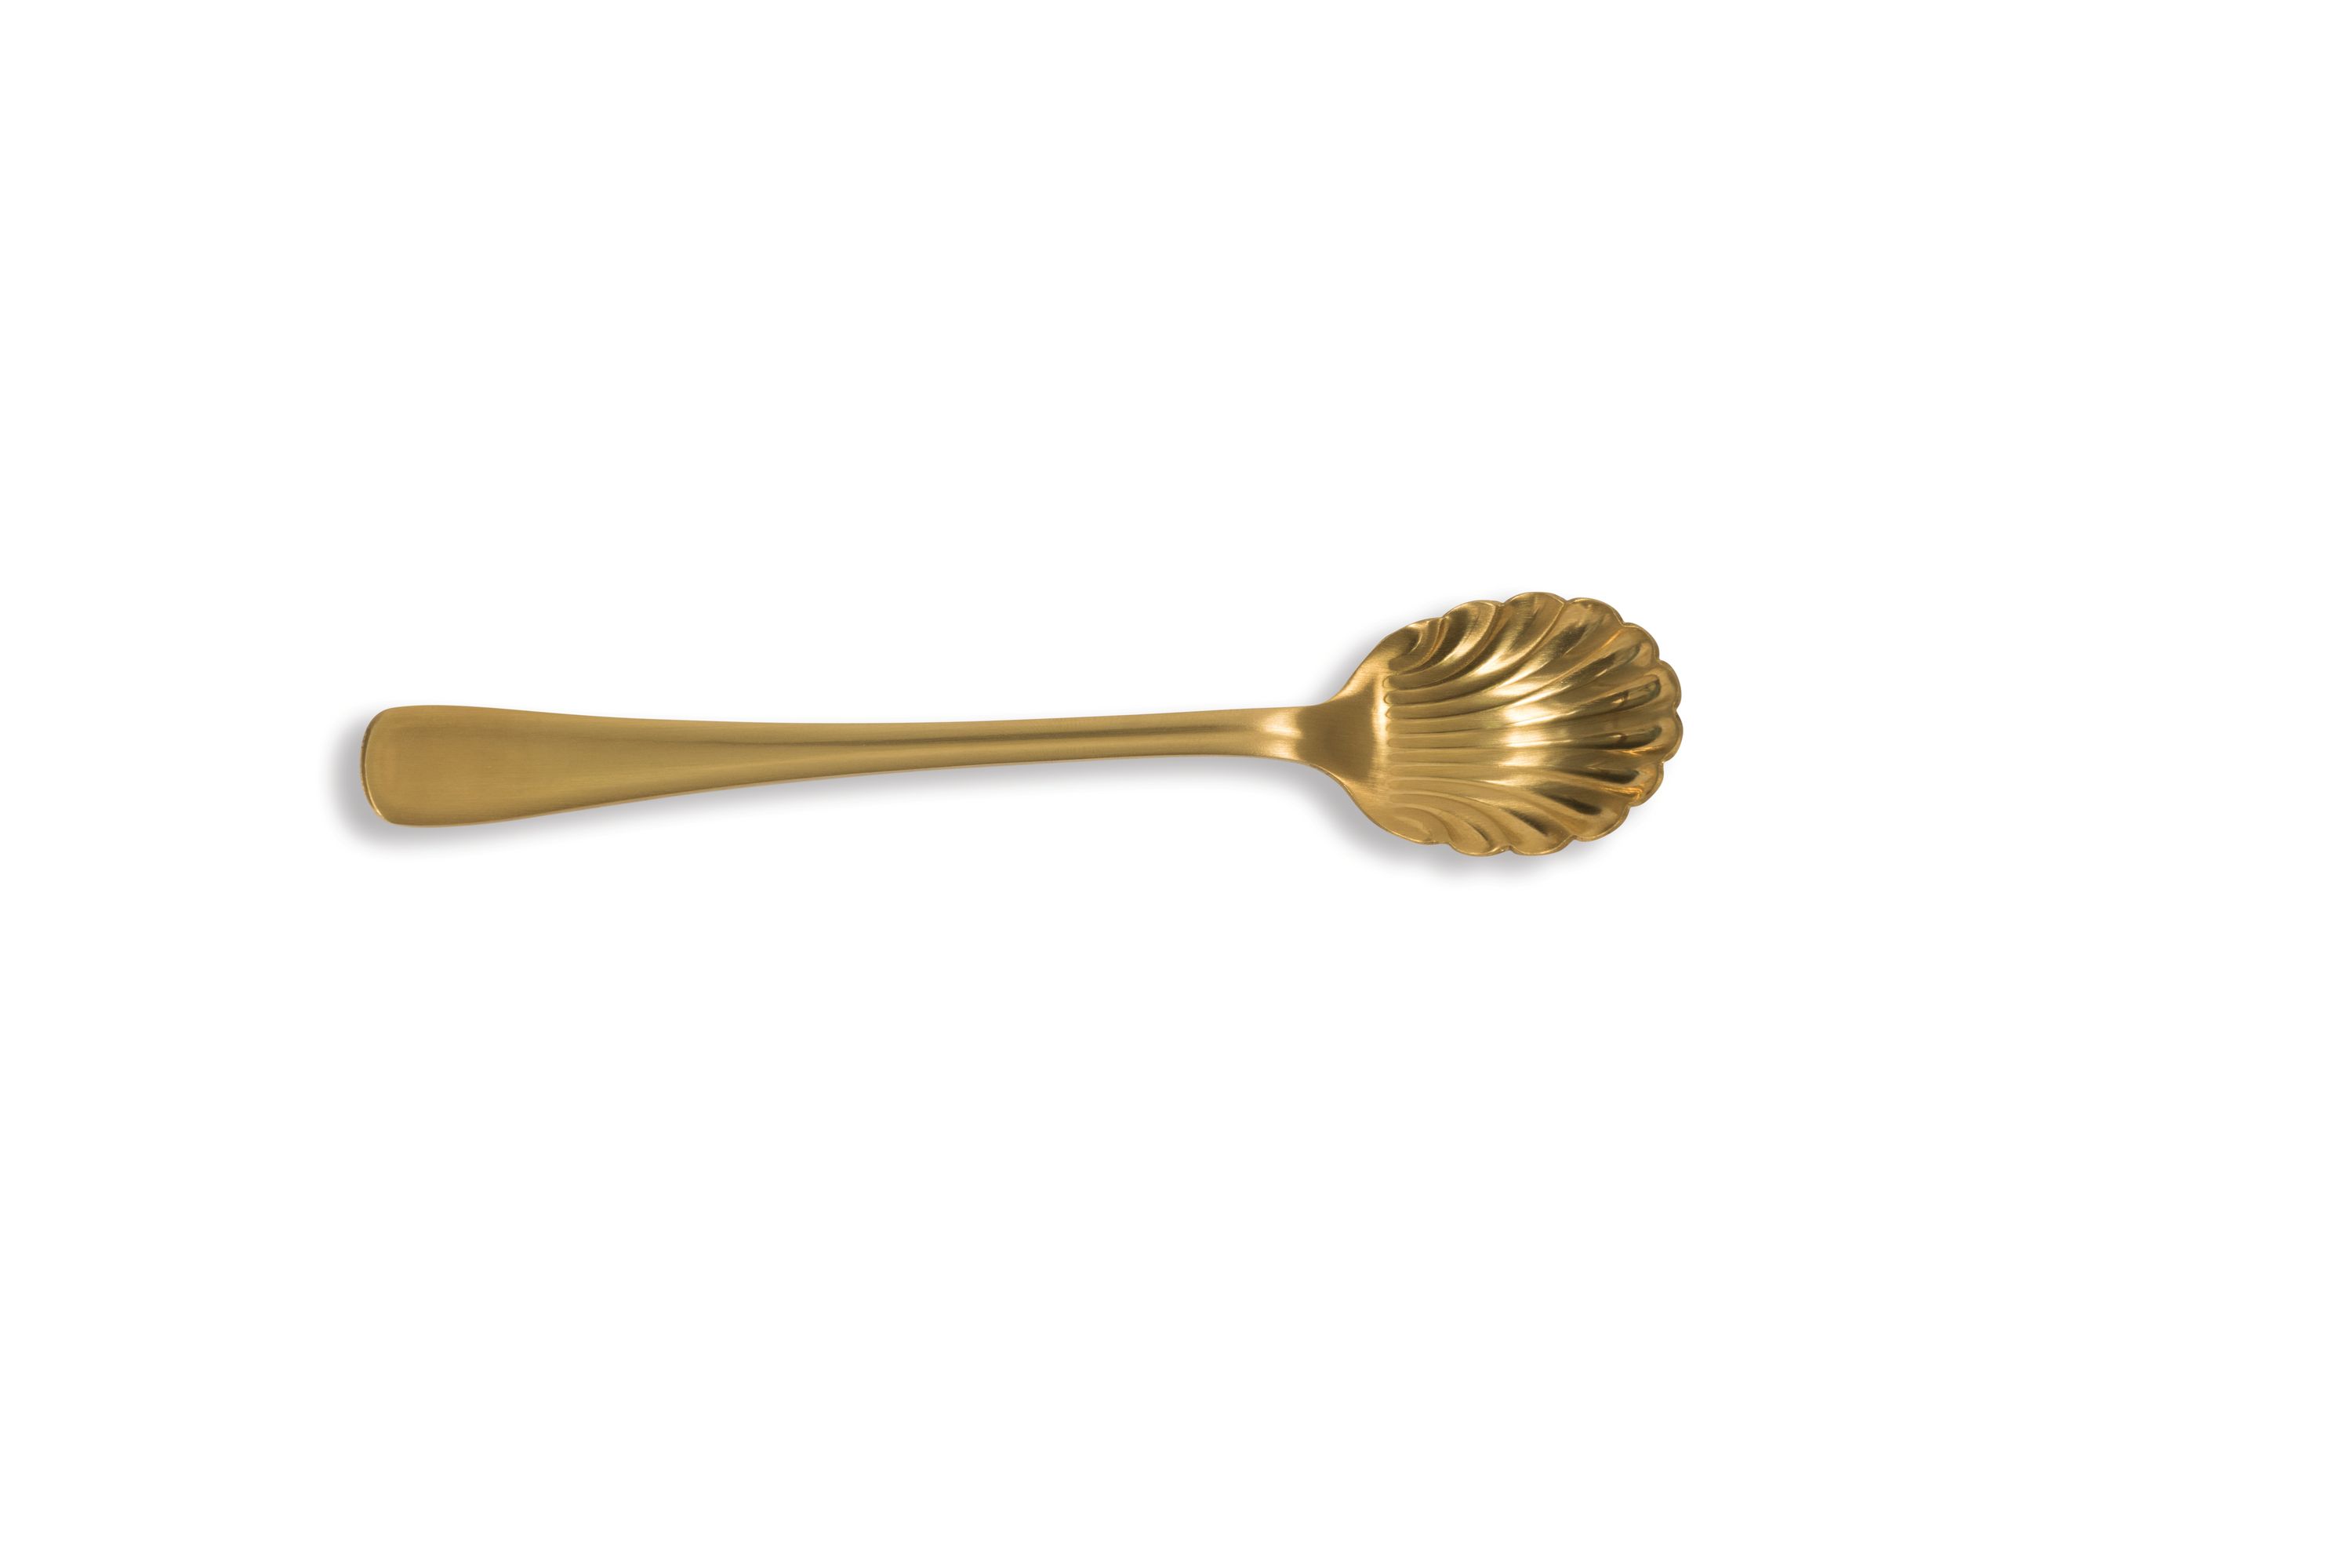 Unc Good Morning Spoon Gold Set Of 4 In Gift Pack Gift